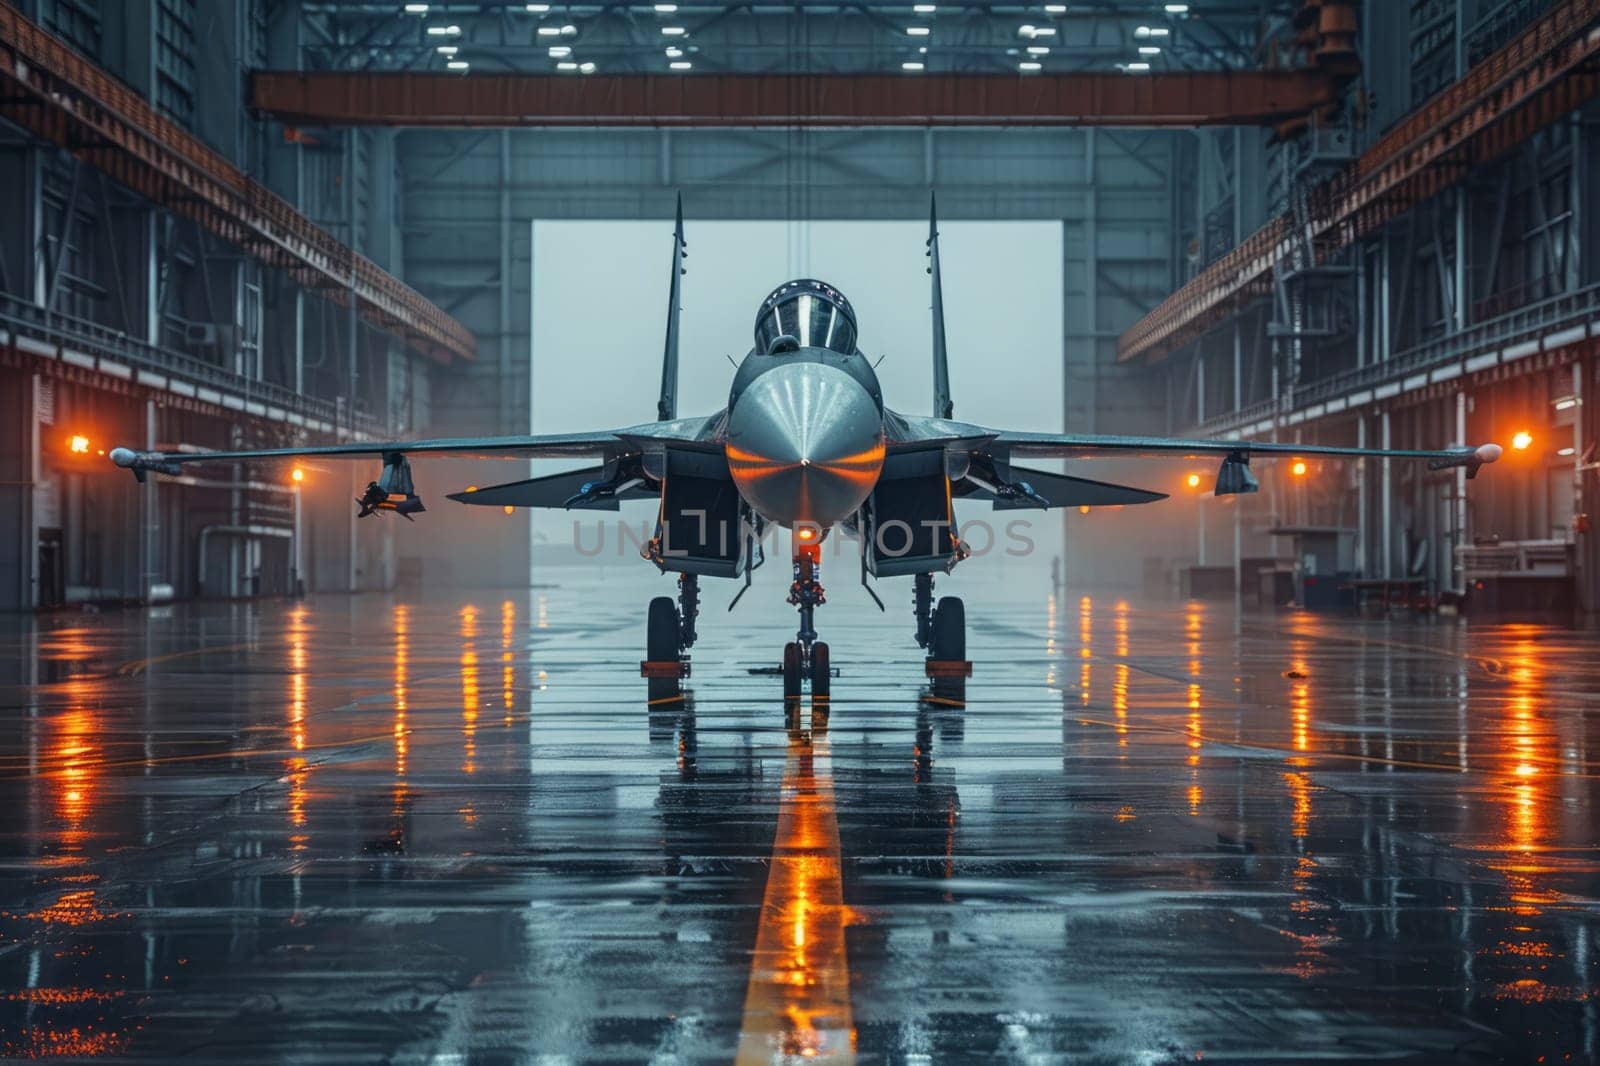 A fighter aircraft is parked in an aerospace building hangar by richwolf